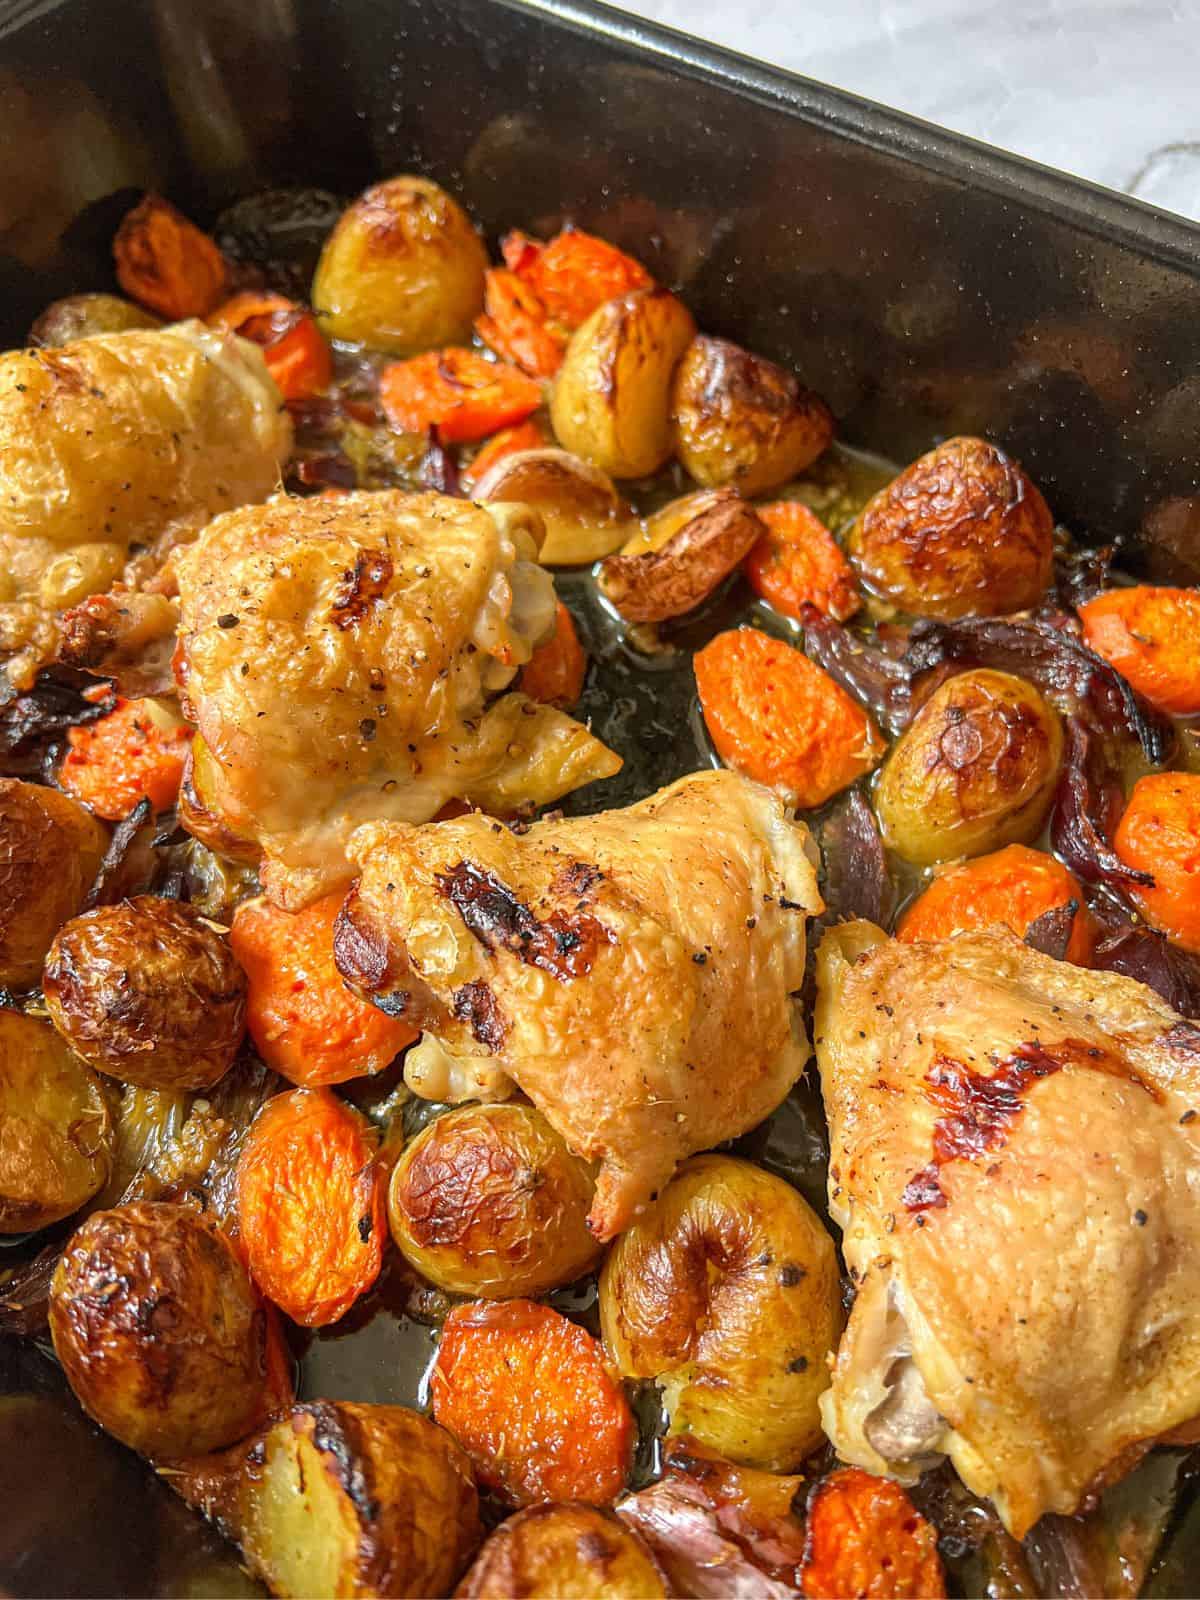 Roasted chicken thighs, carrots and potatoes in a roasting tin.